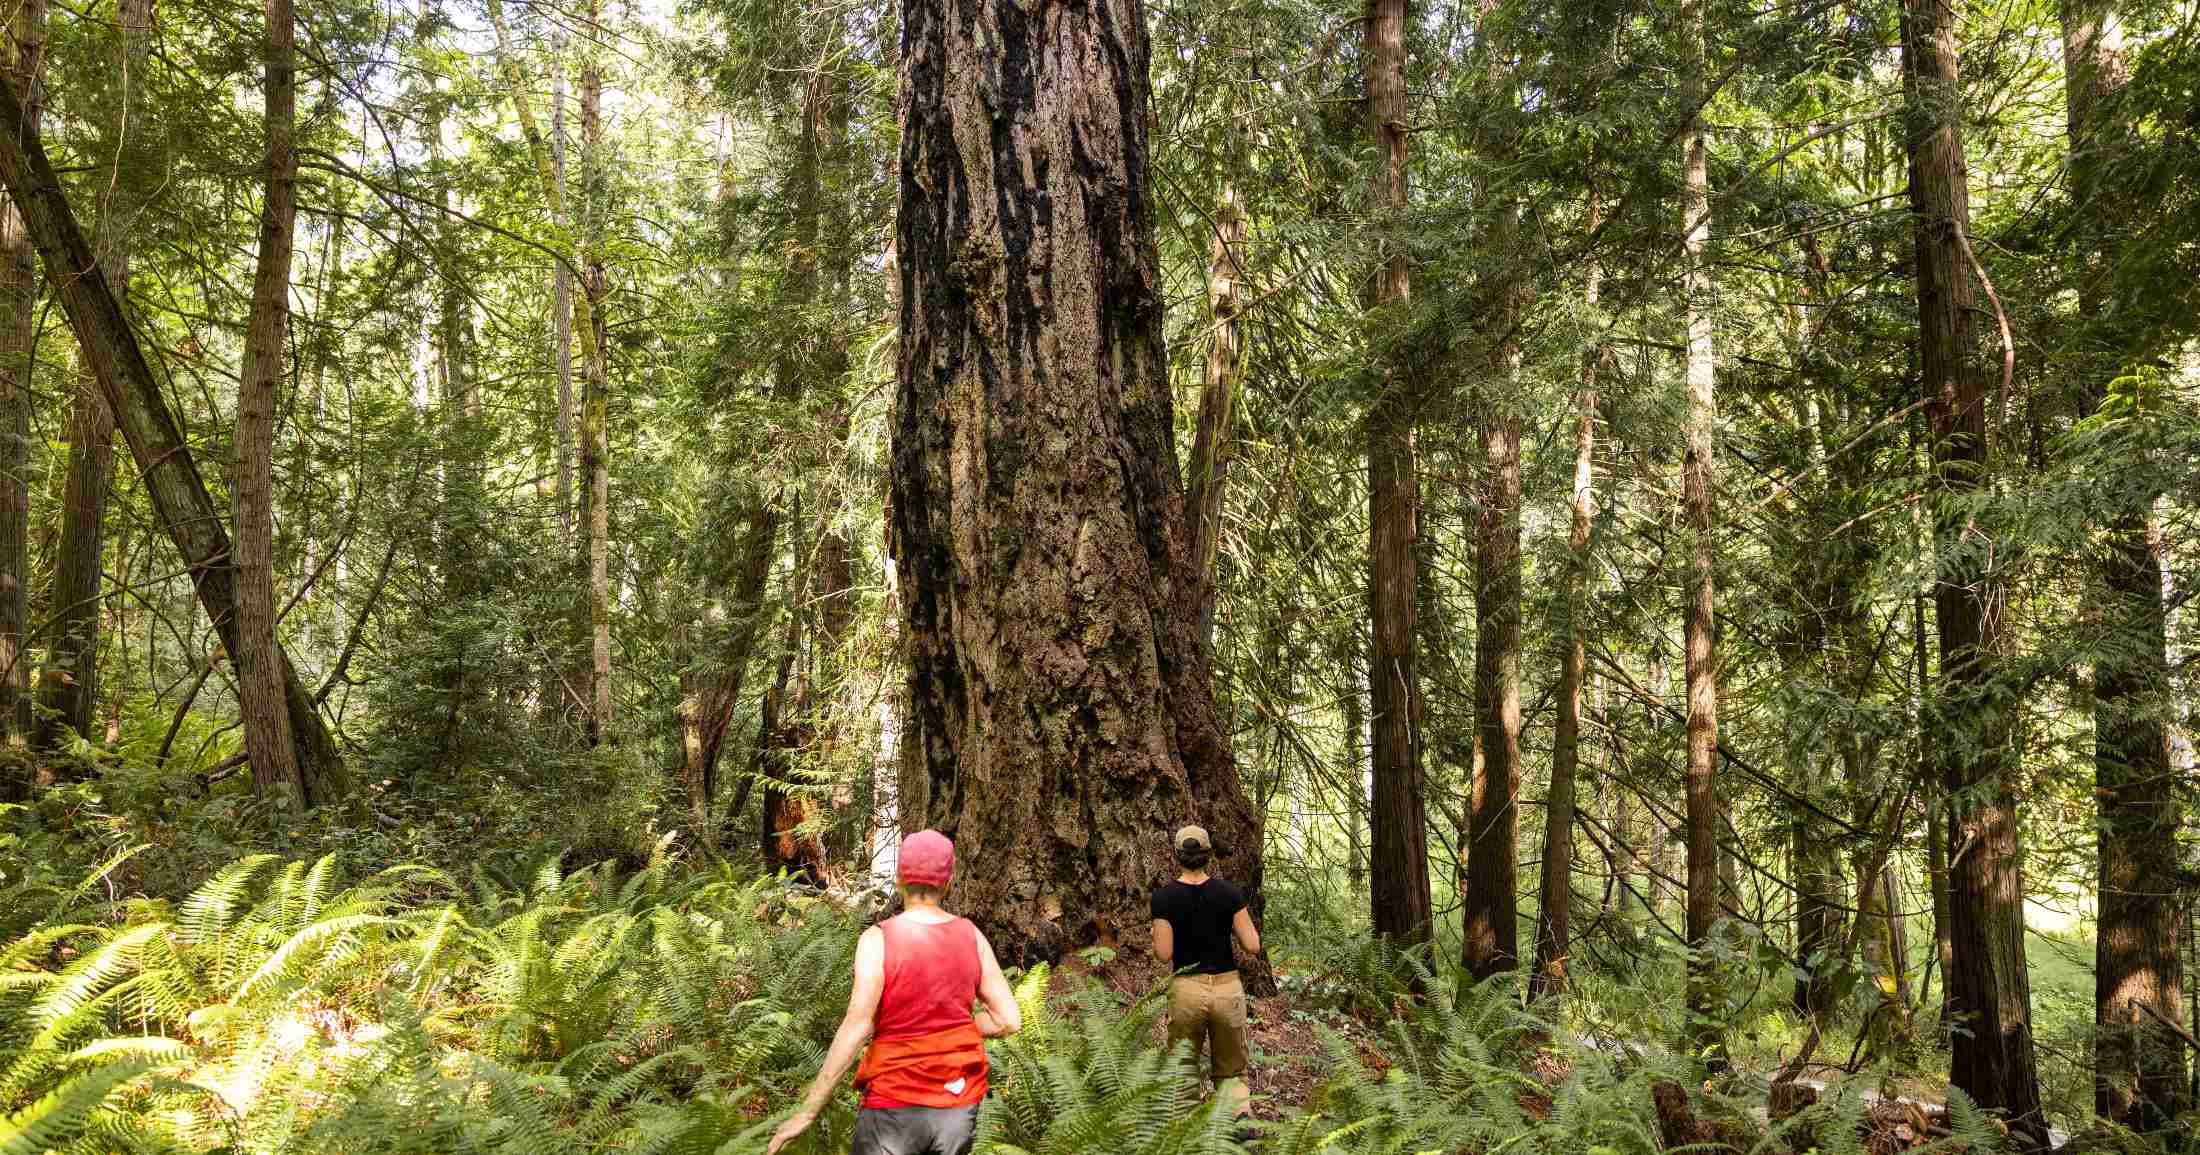 Two people walking towards a big tree in the forest.